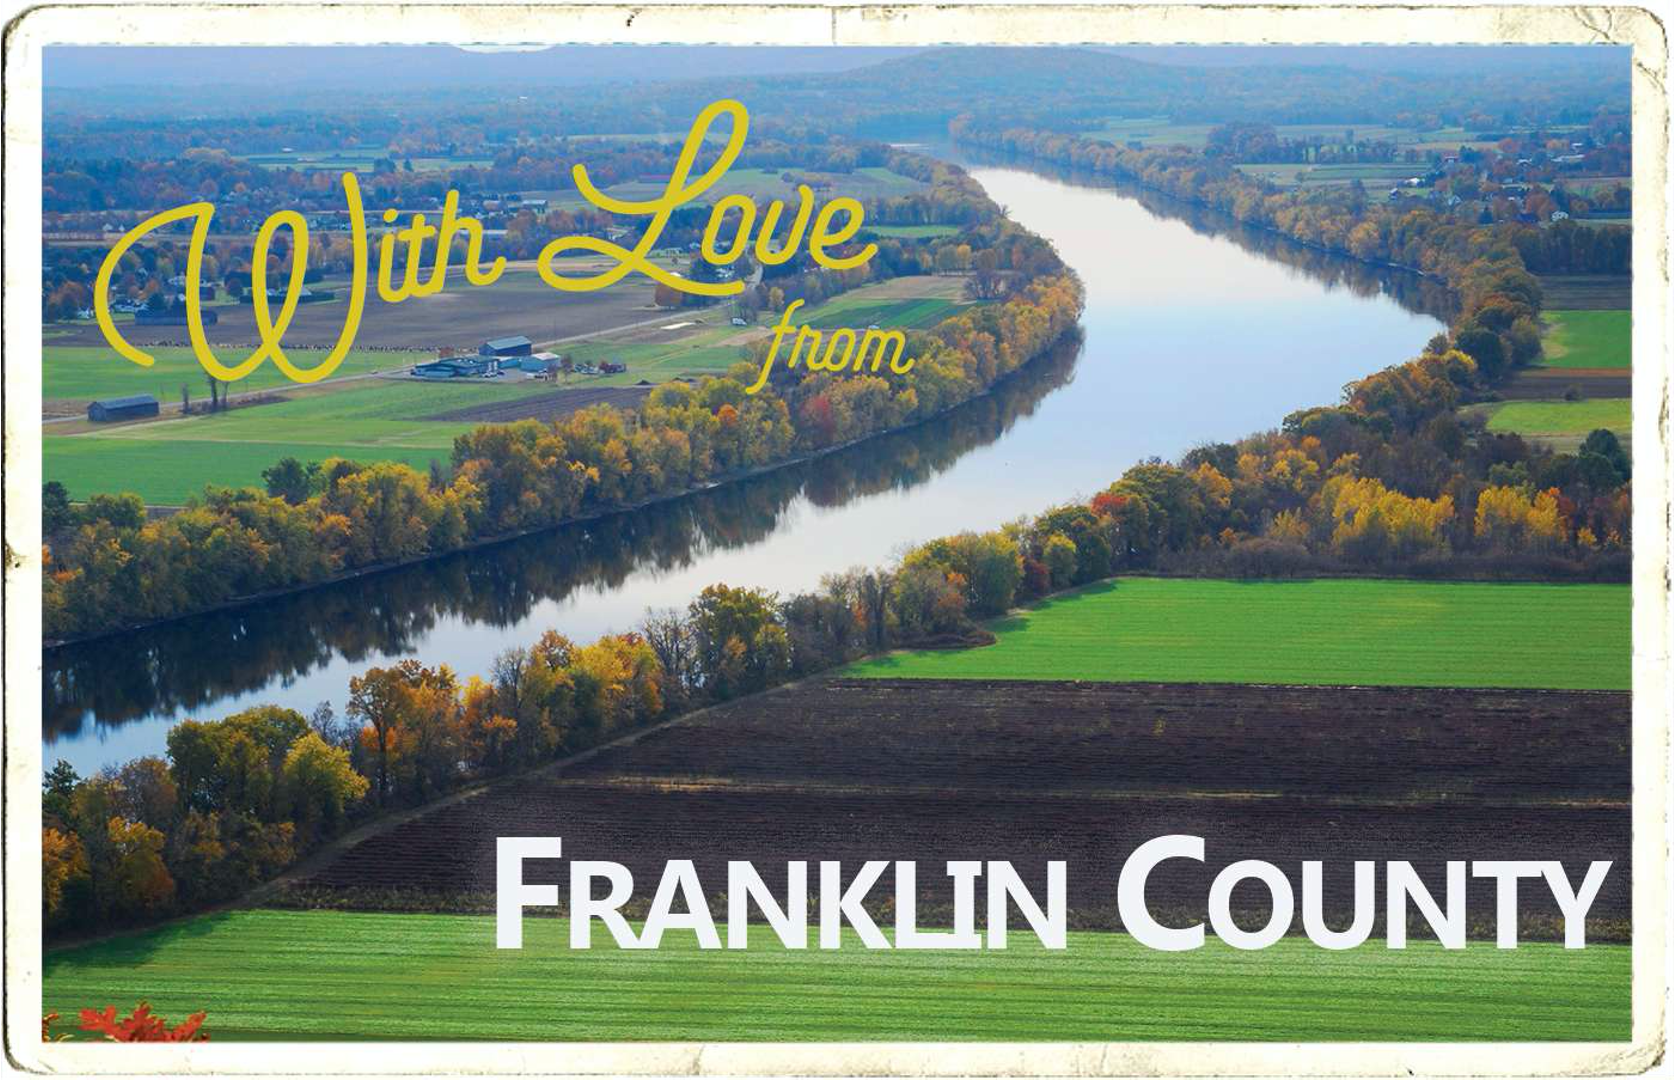 With Love from Franklin County